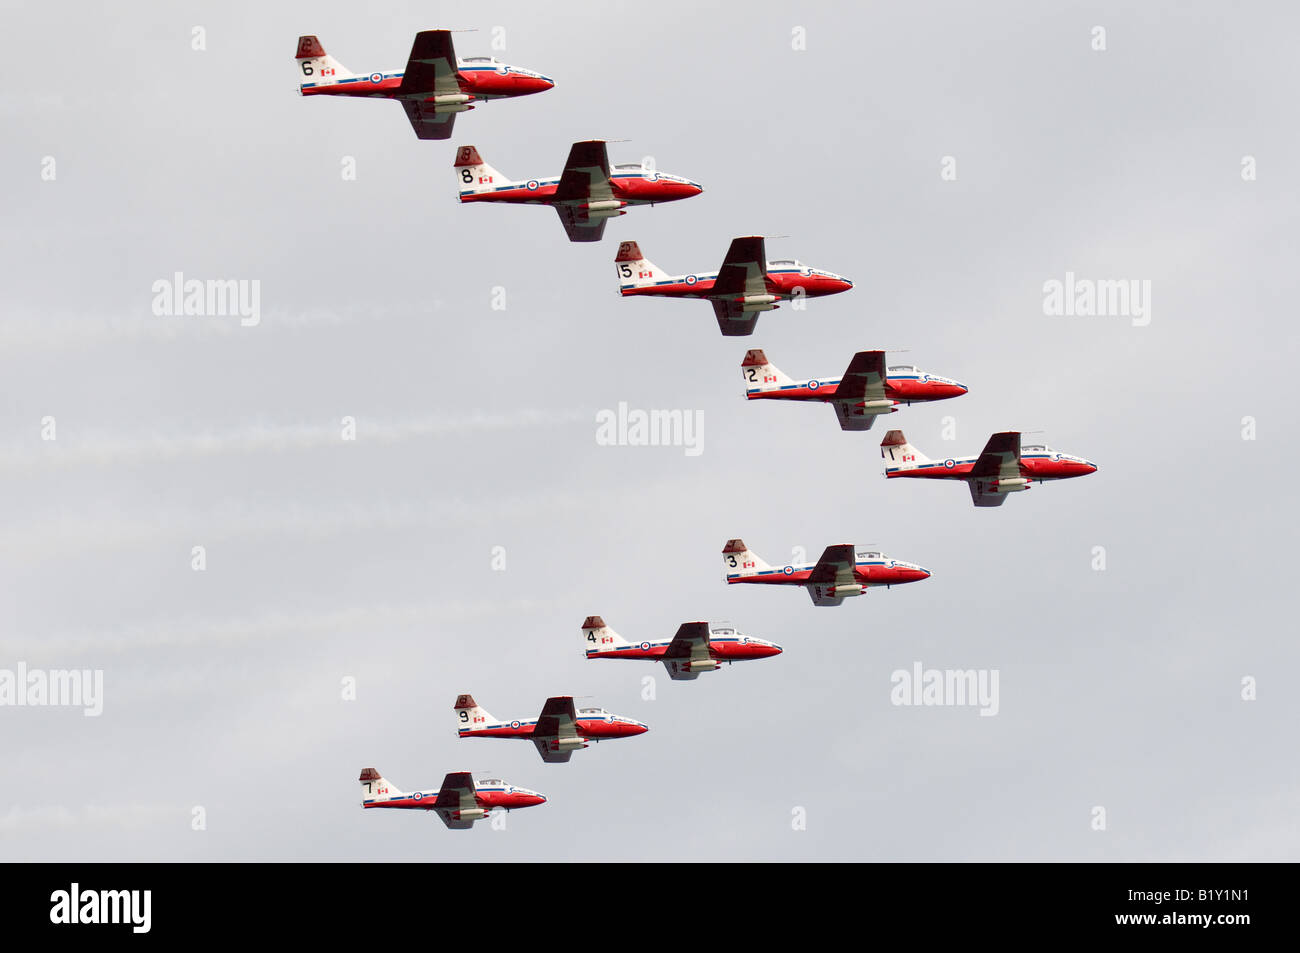 The Snowbirds, Canada's extreme aerobatic team, perform precise maneuvers together in the sky. Stock Photo